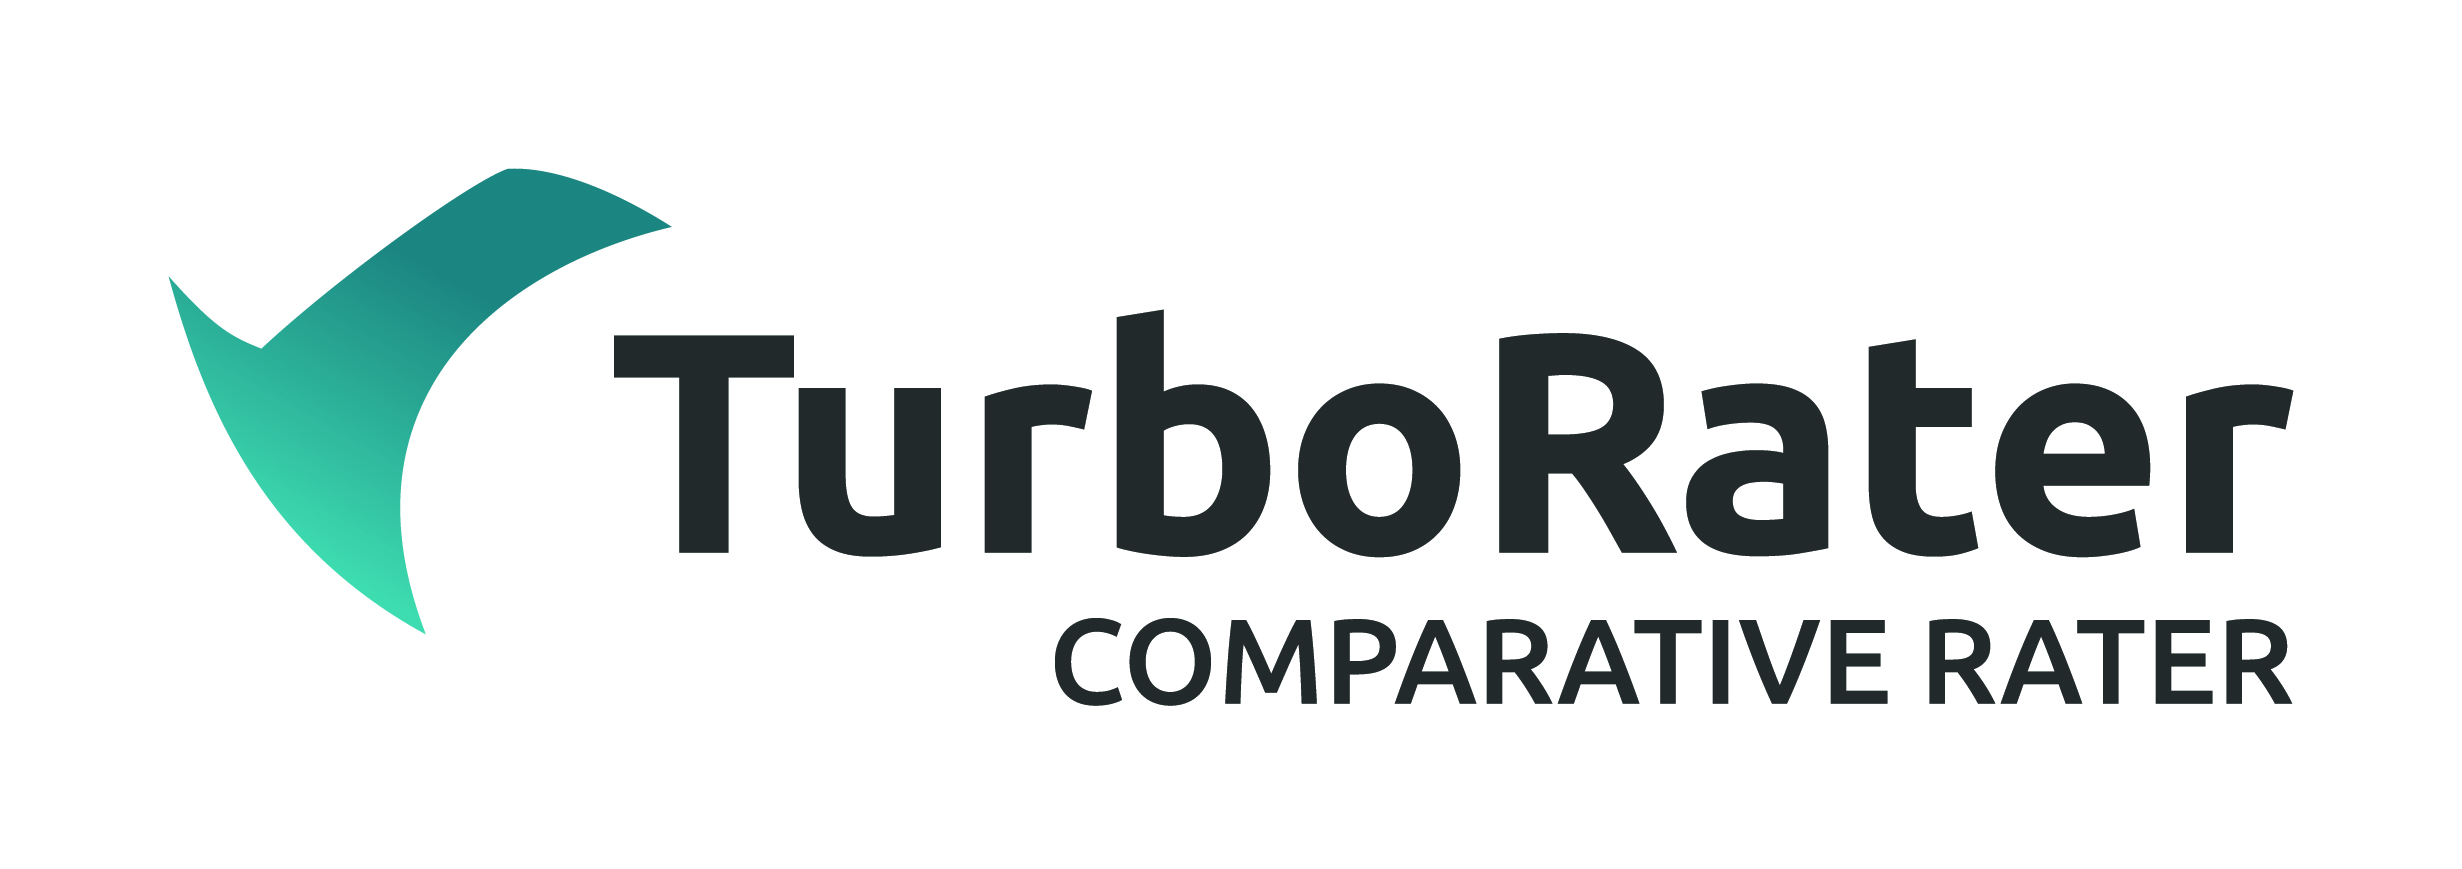 TurboRater, insurance rating software from ITC